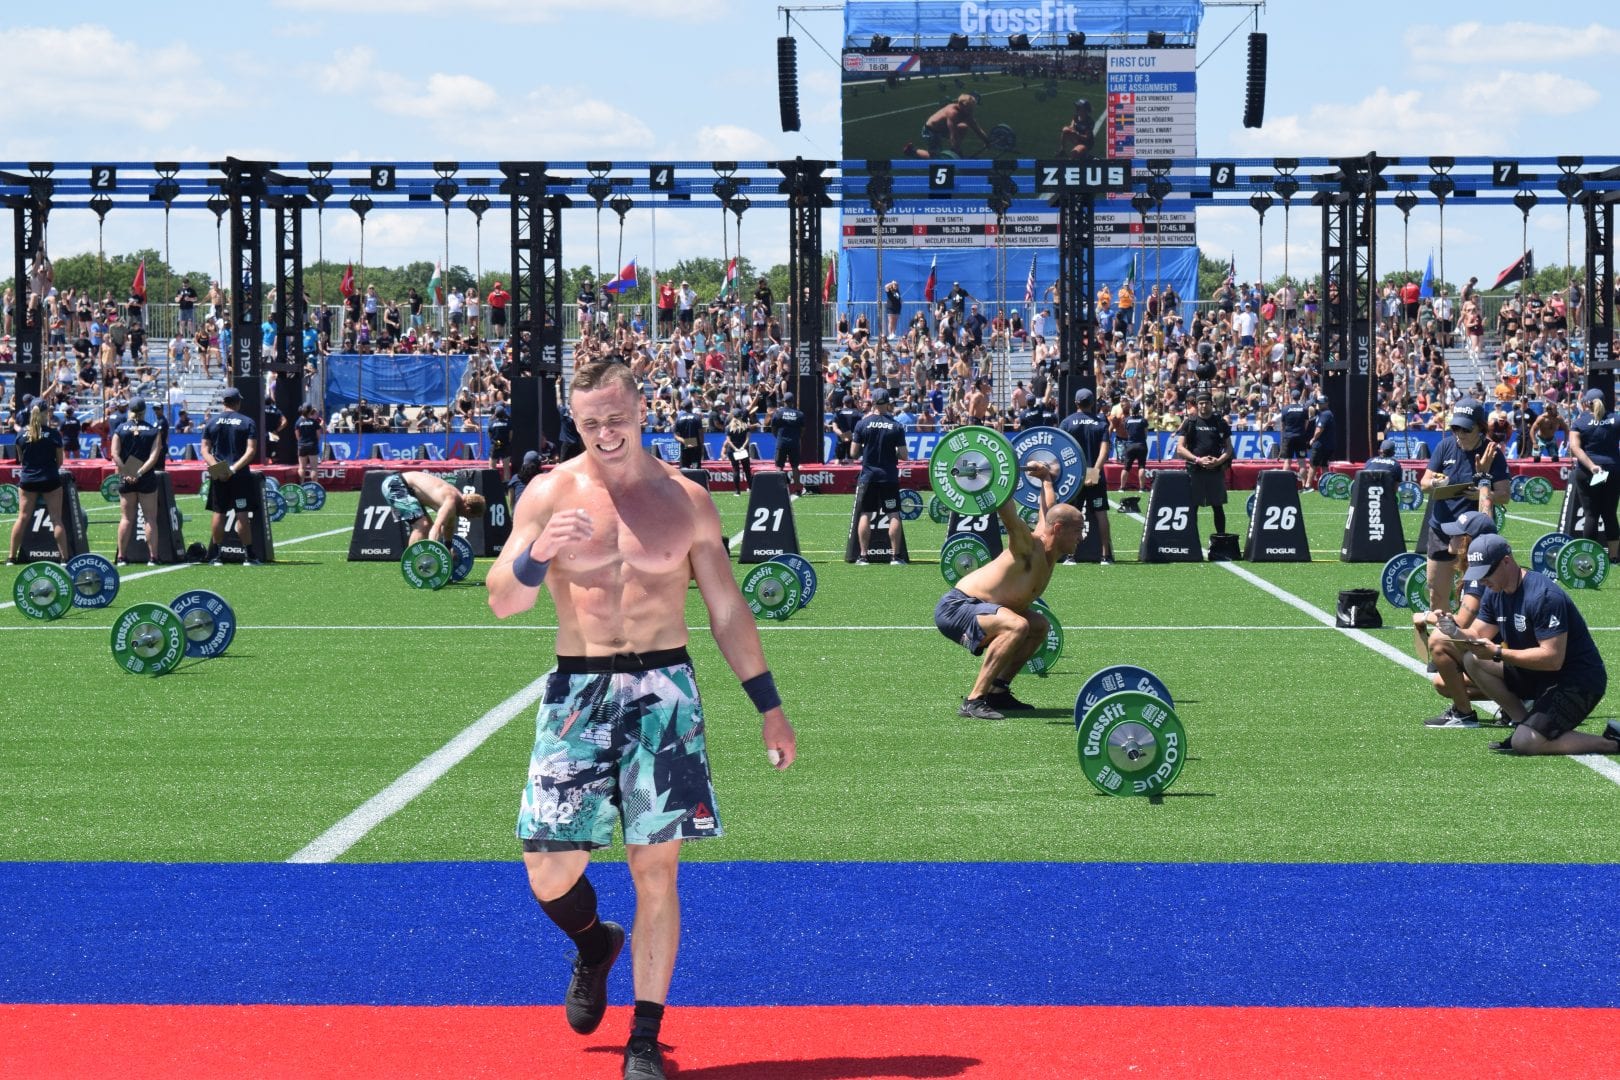 Bjorgvin Karl Gudmundsson crosses the finish line of the first event at the 2019 CrossFit Games